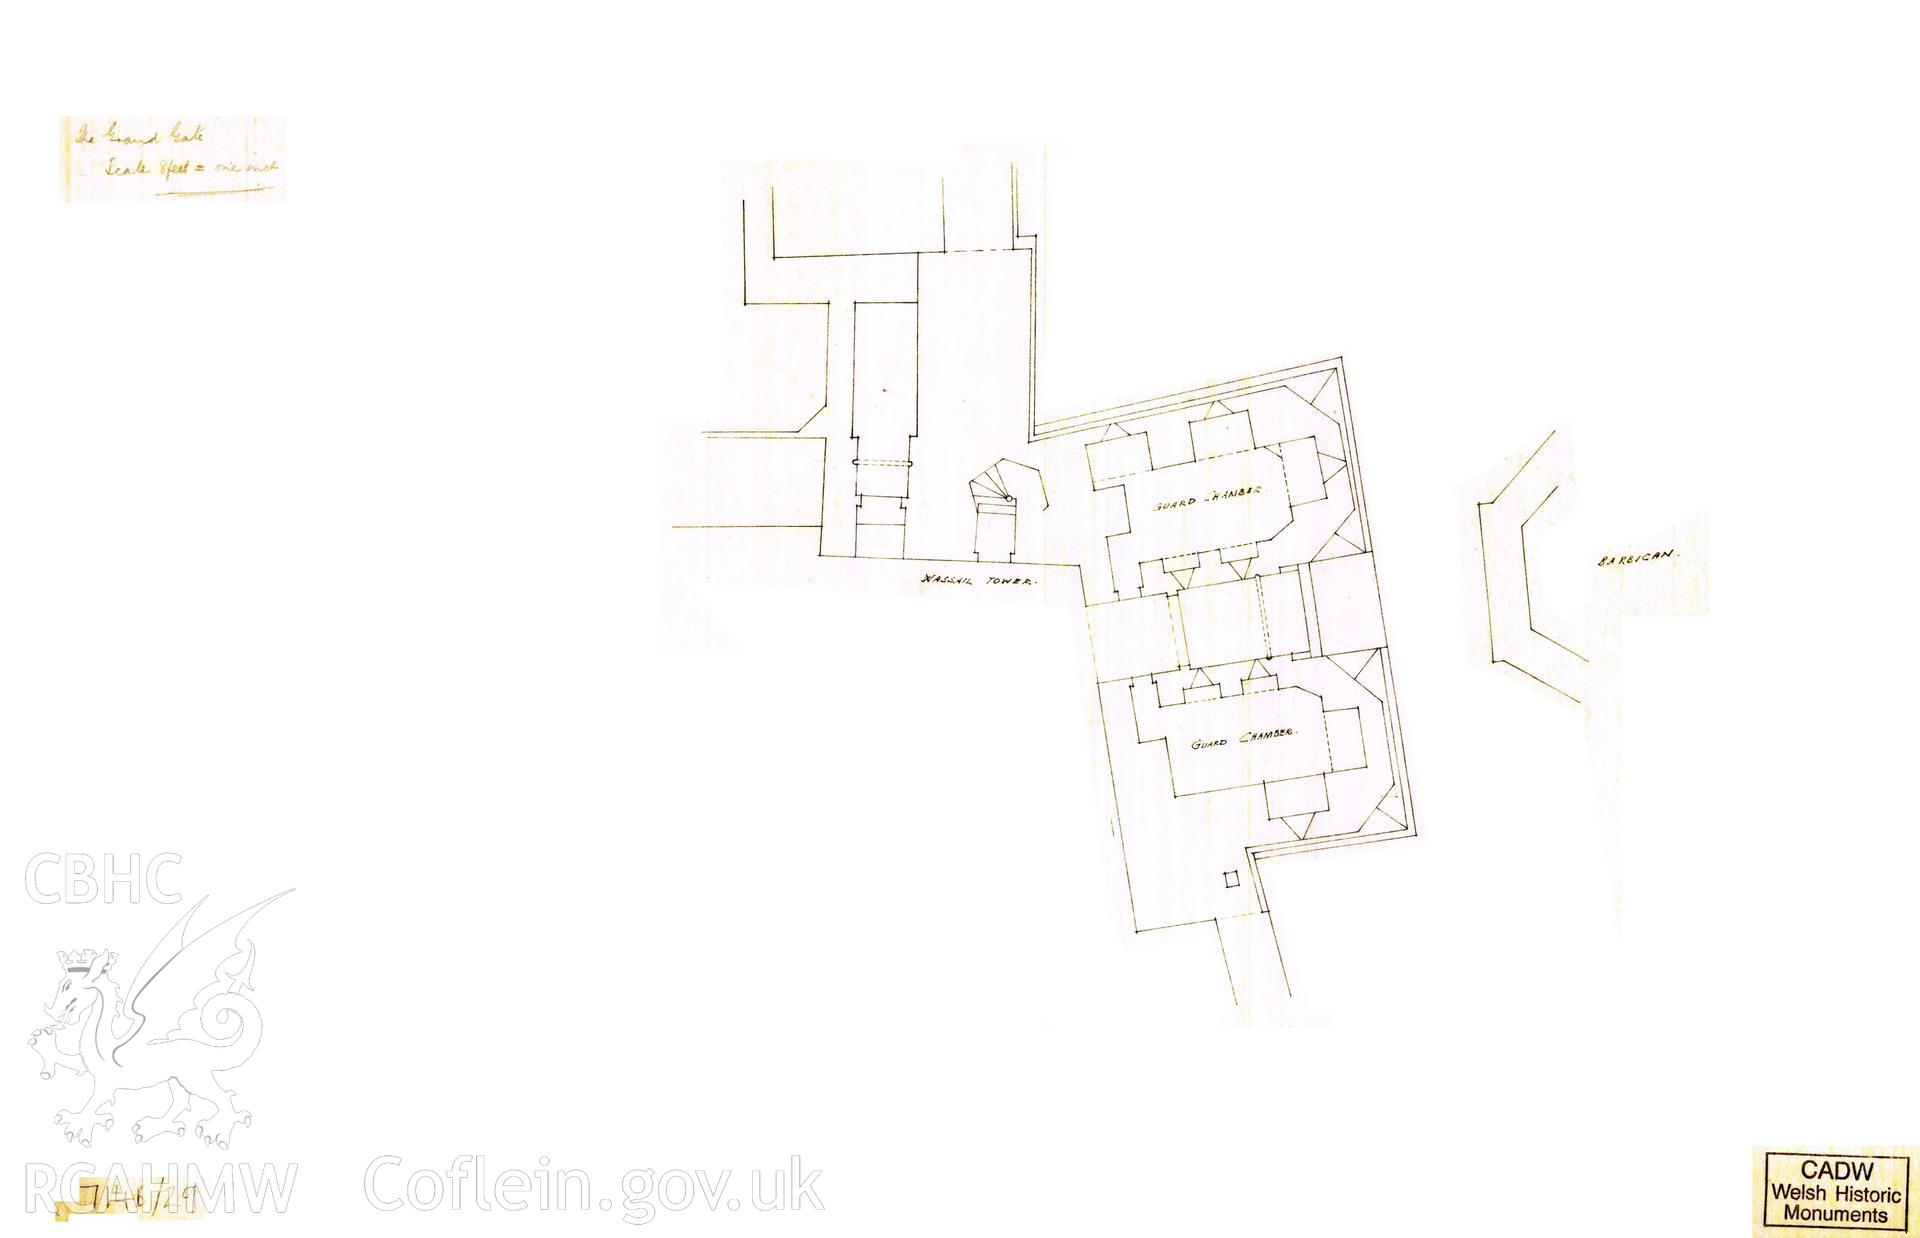 Cadw guardianship monument drawing of Caerphilly Castle. Outer E gate, ground plan. Cadw ref. no: 714B/29. Scale 1:96.